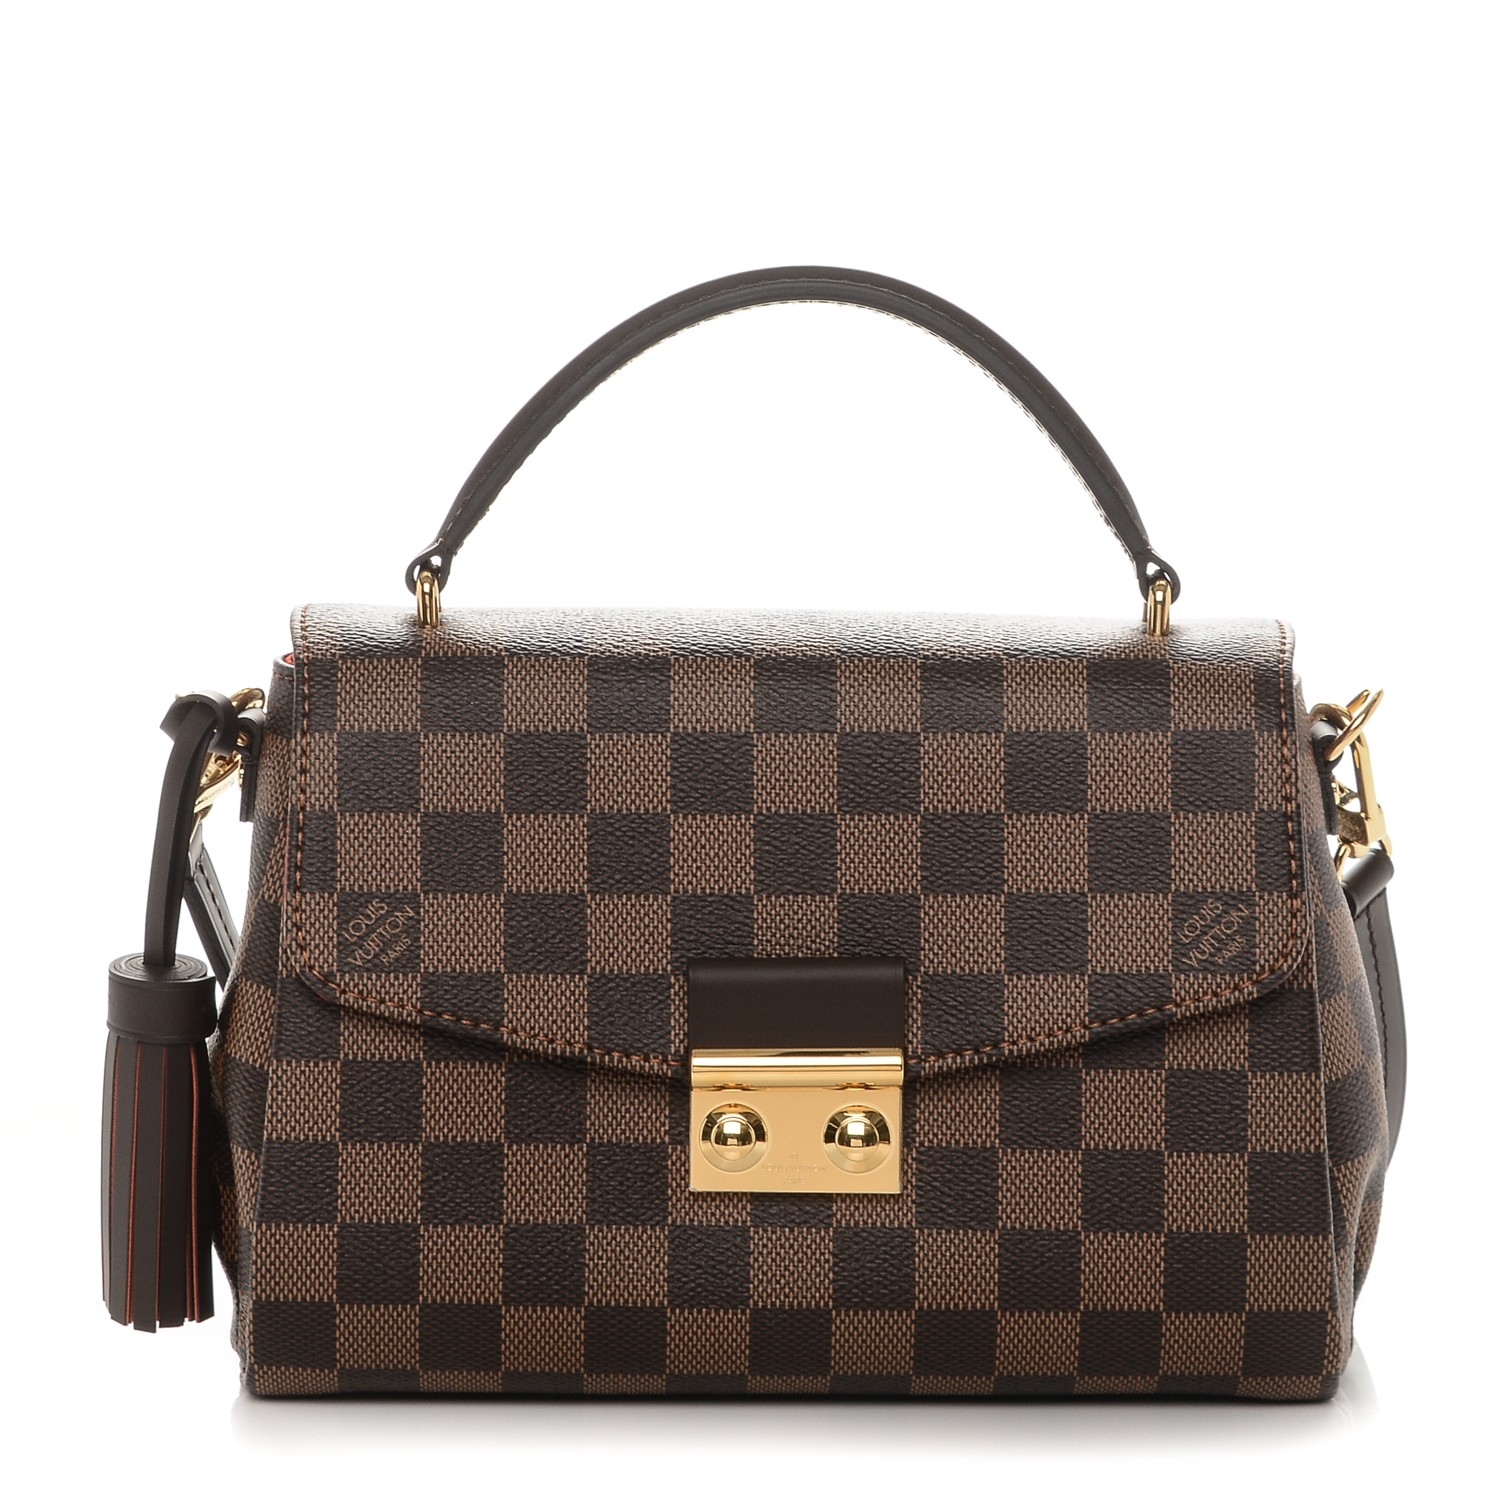 Vuitton Croisette Germany, SAVE 53% 